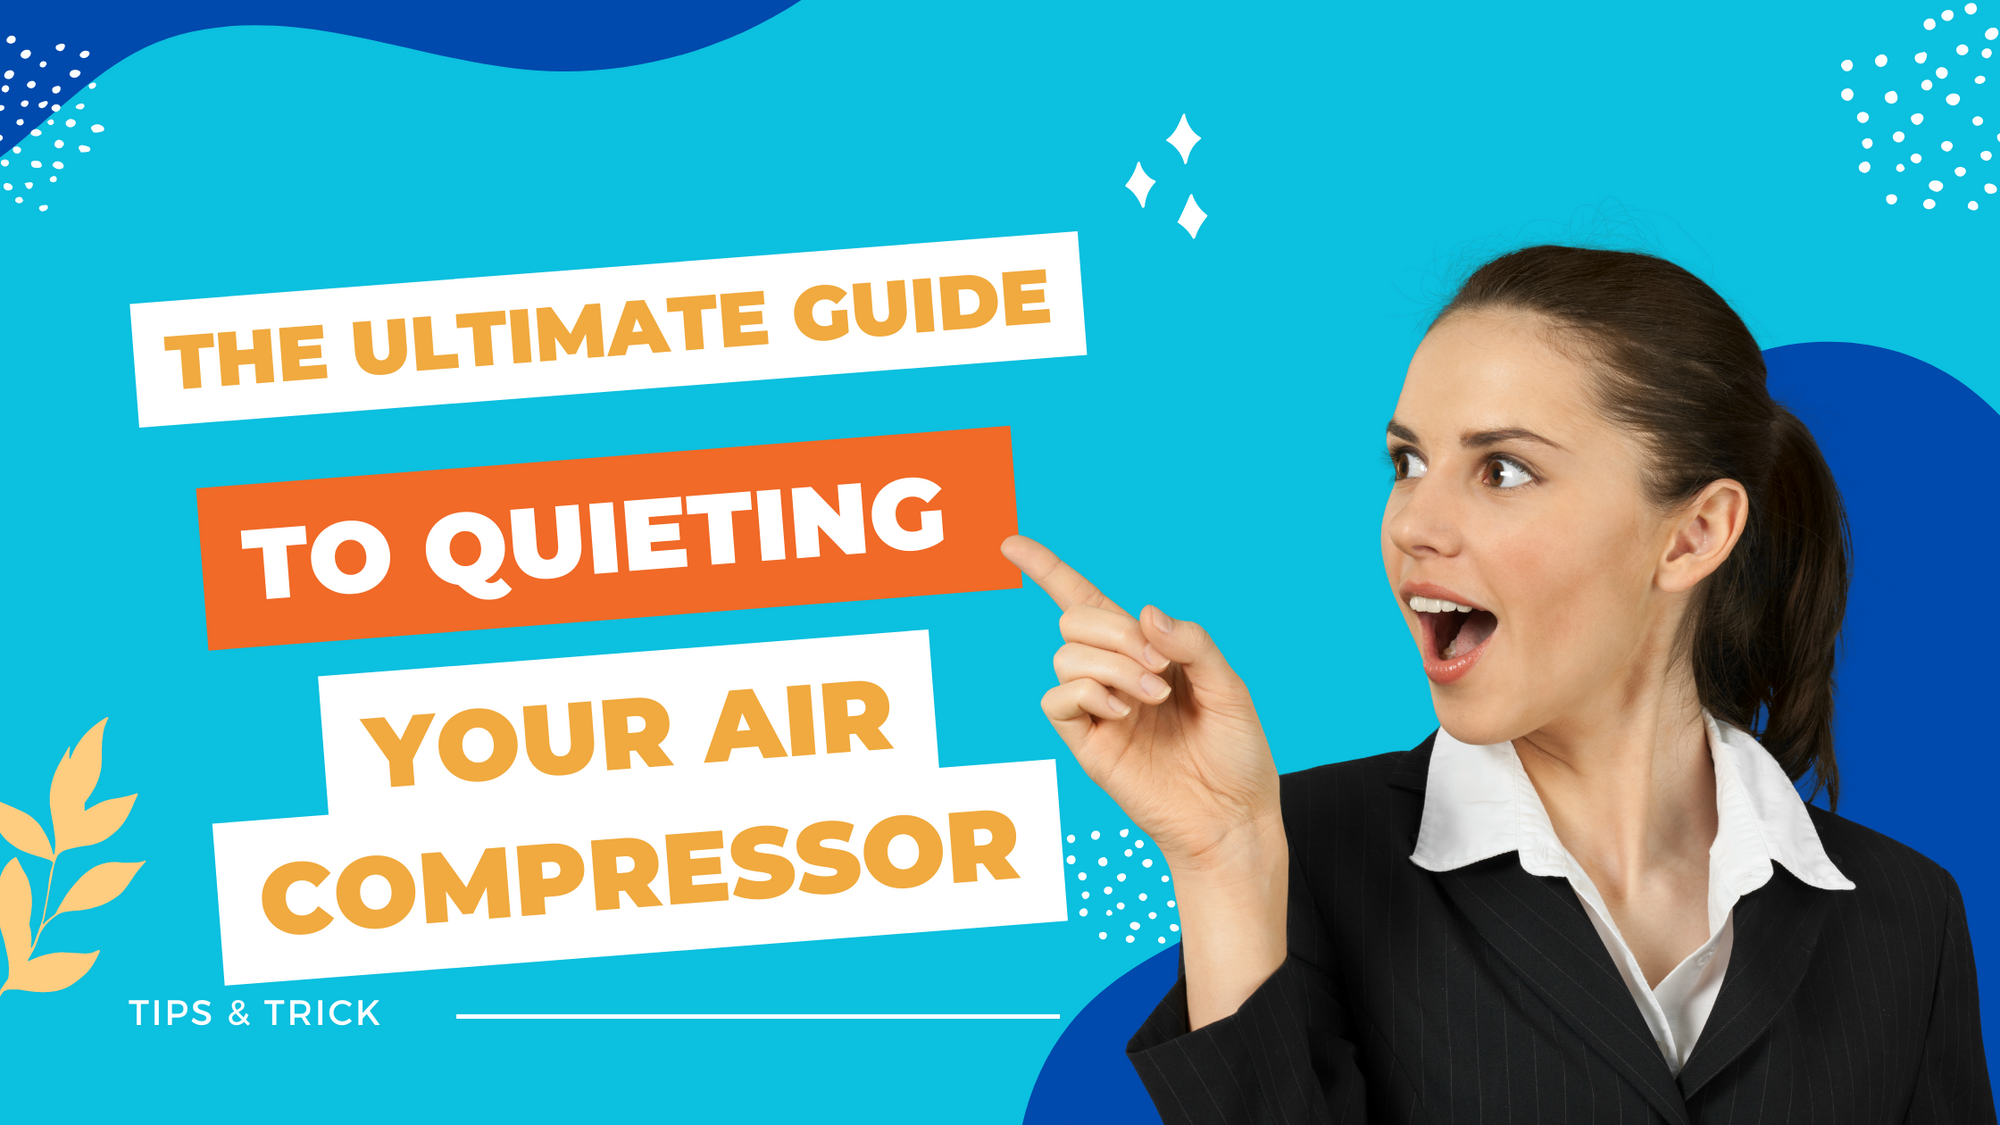 The Ultimate Guide to Quieting Your Air Compressor